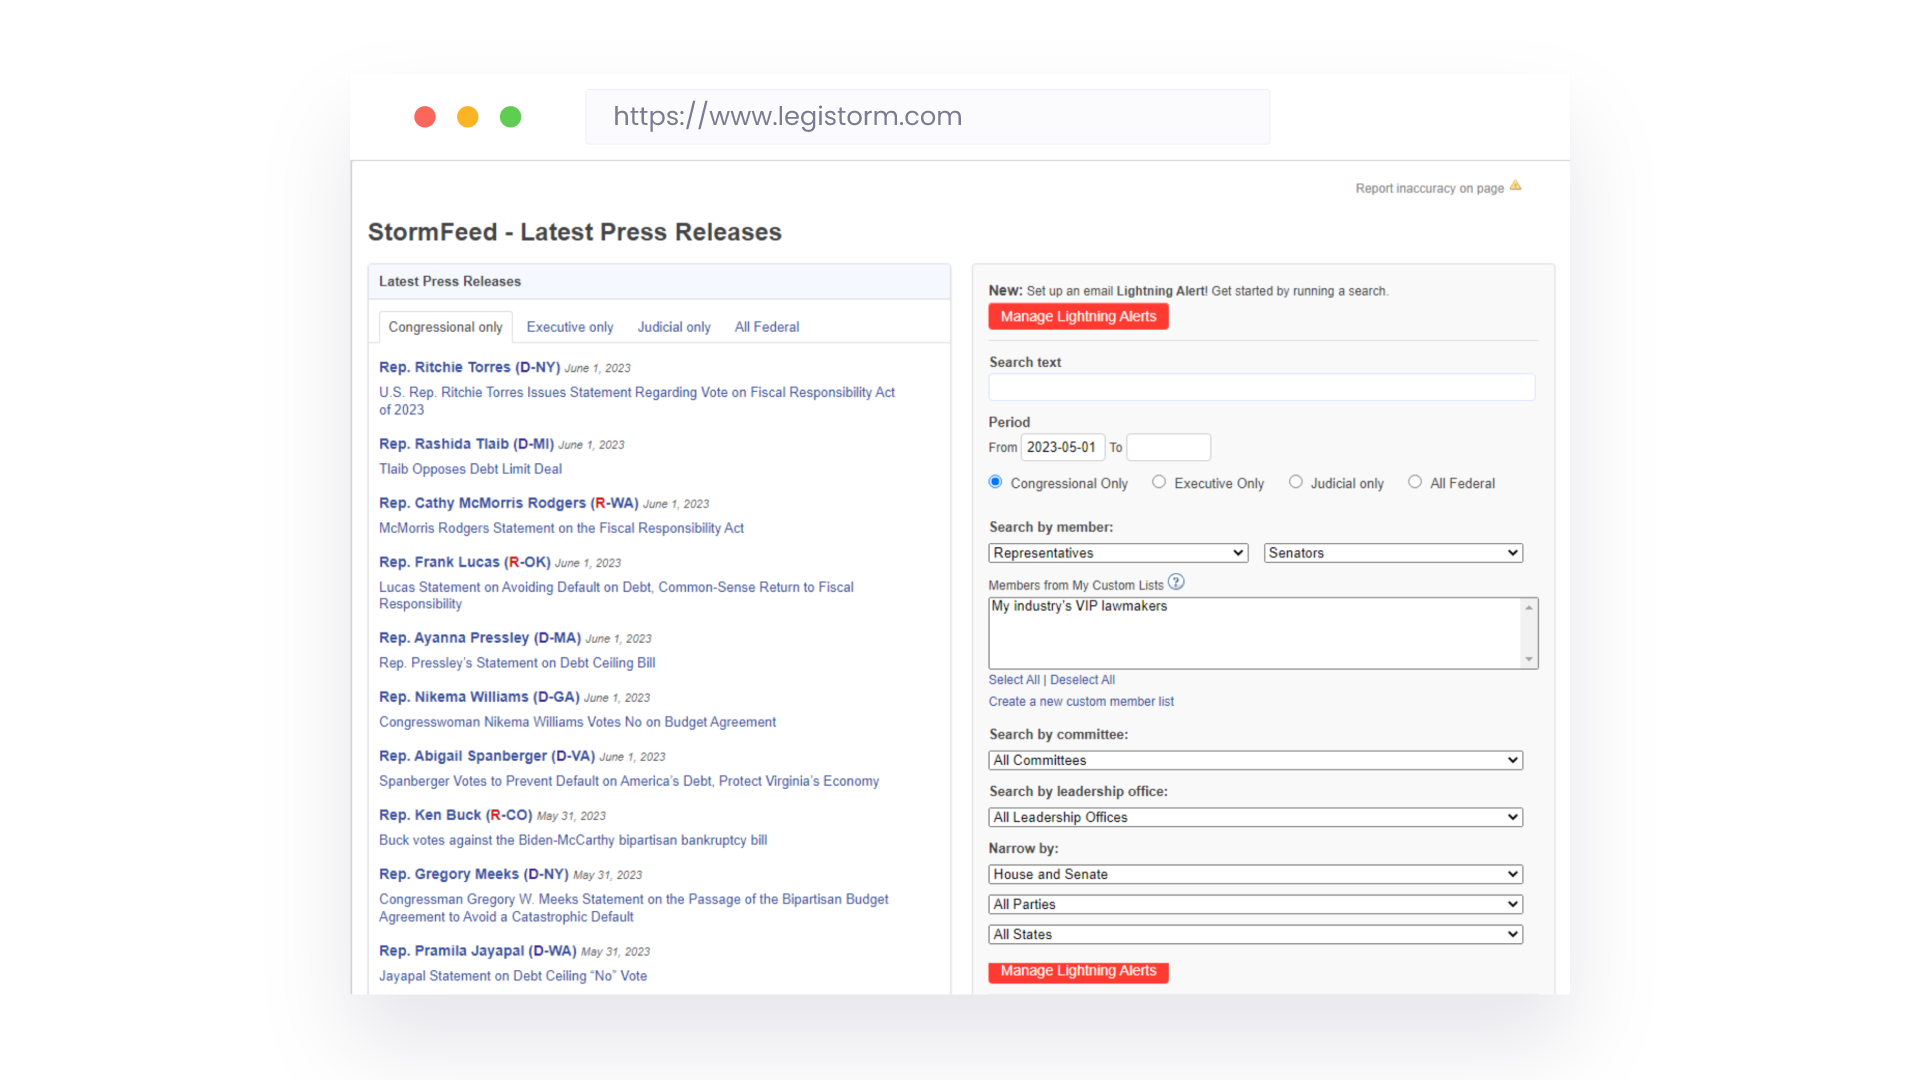 Get real-time access to every press release from congressional, executive and judicial offices or dig through millions of releases dating back to 2013 with ease.